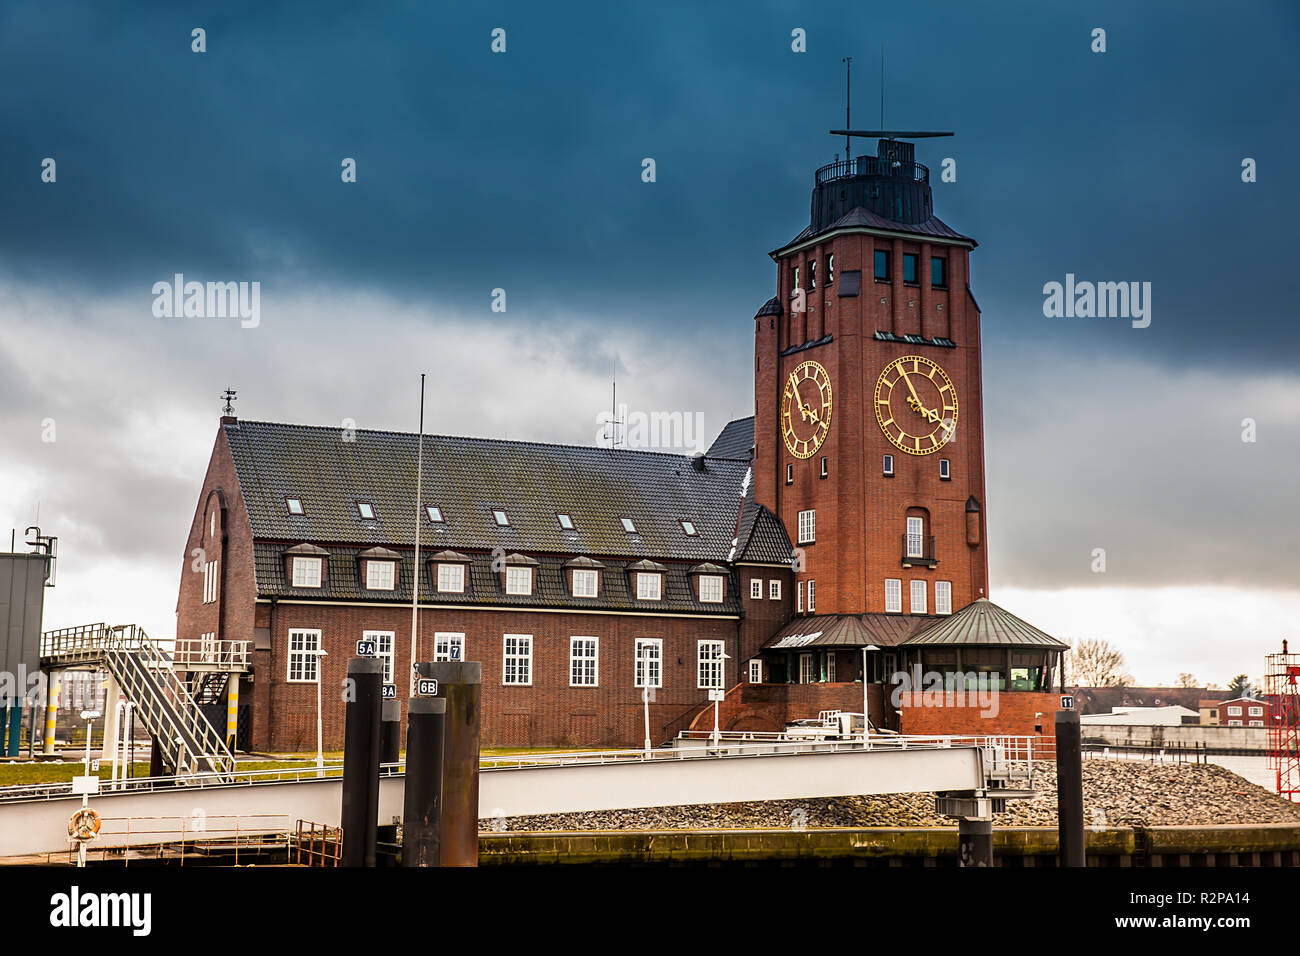 Navigator Tower at Finkenwerder on the banks of the Elbe river in Hamburg Stock Photo